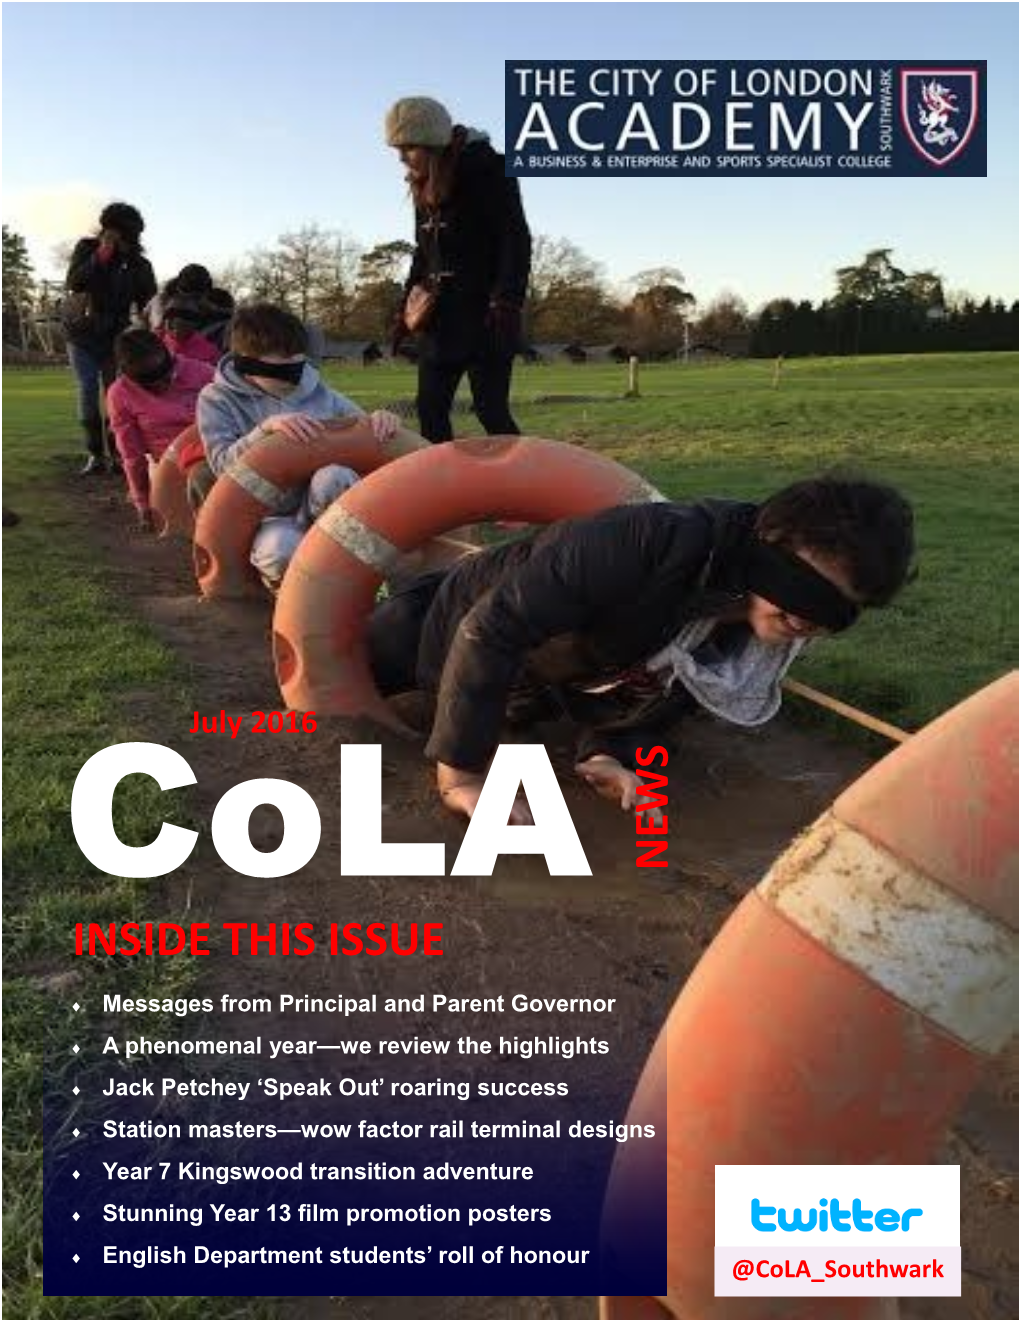 Cola NEWS INSIDE THIS ISSUE